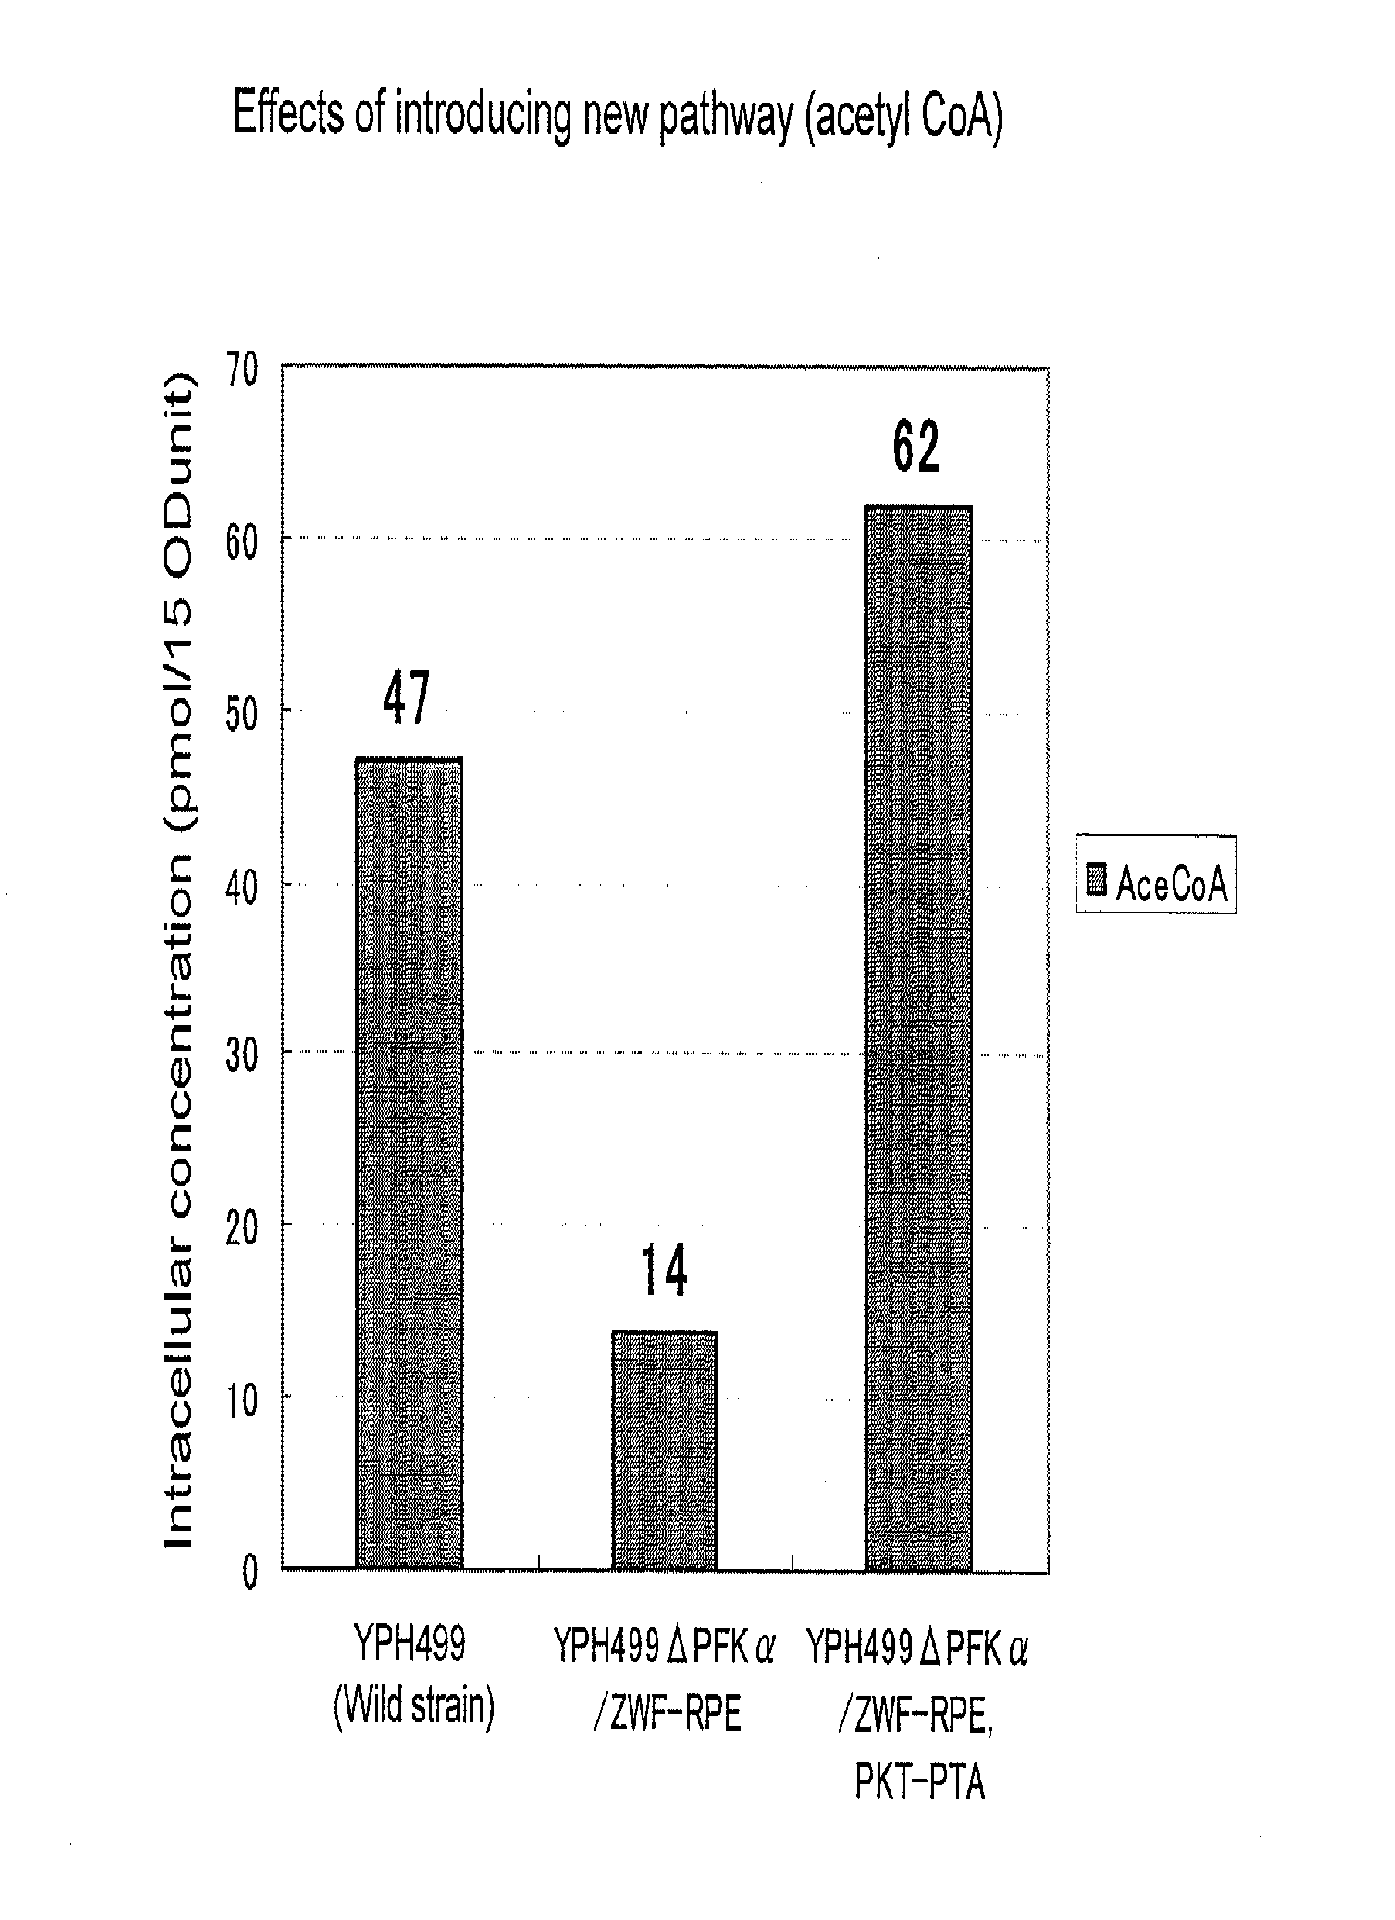 Recombinant yeast and substance production method using the same